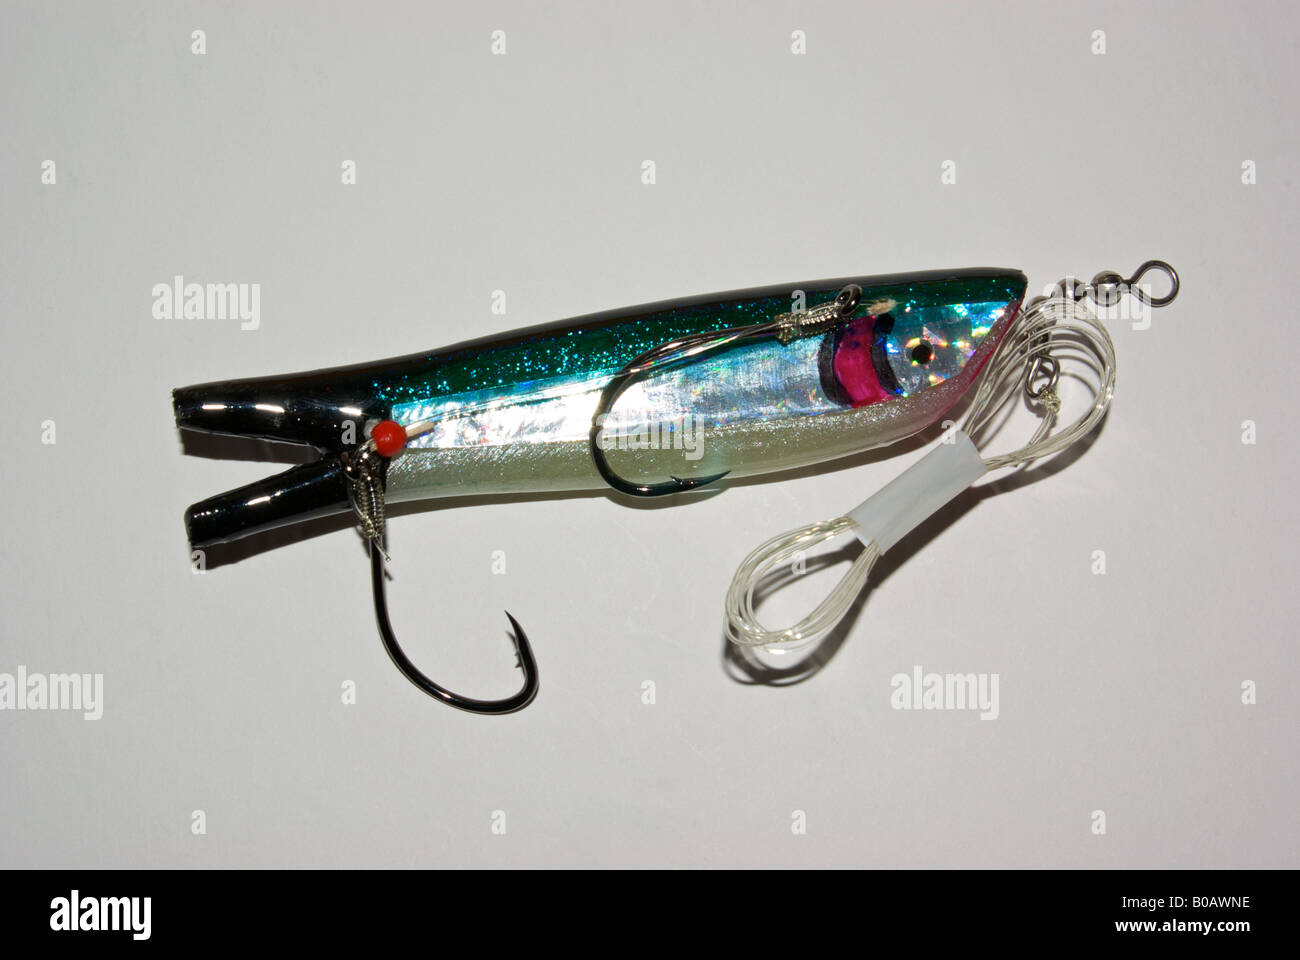 True Roll trolling fishing lure attracts salmon bottom fish and trout Stock  Photo - Alamy